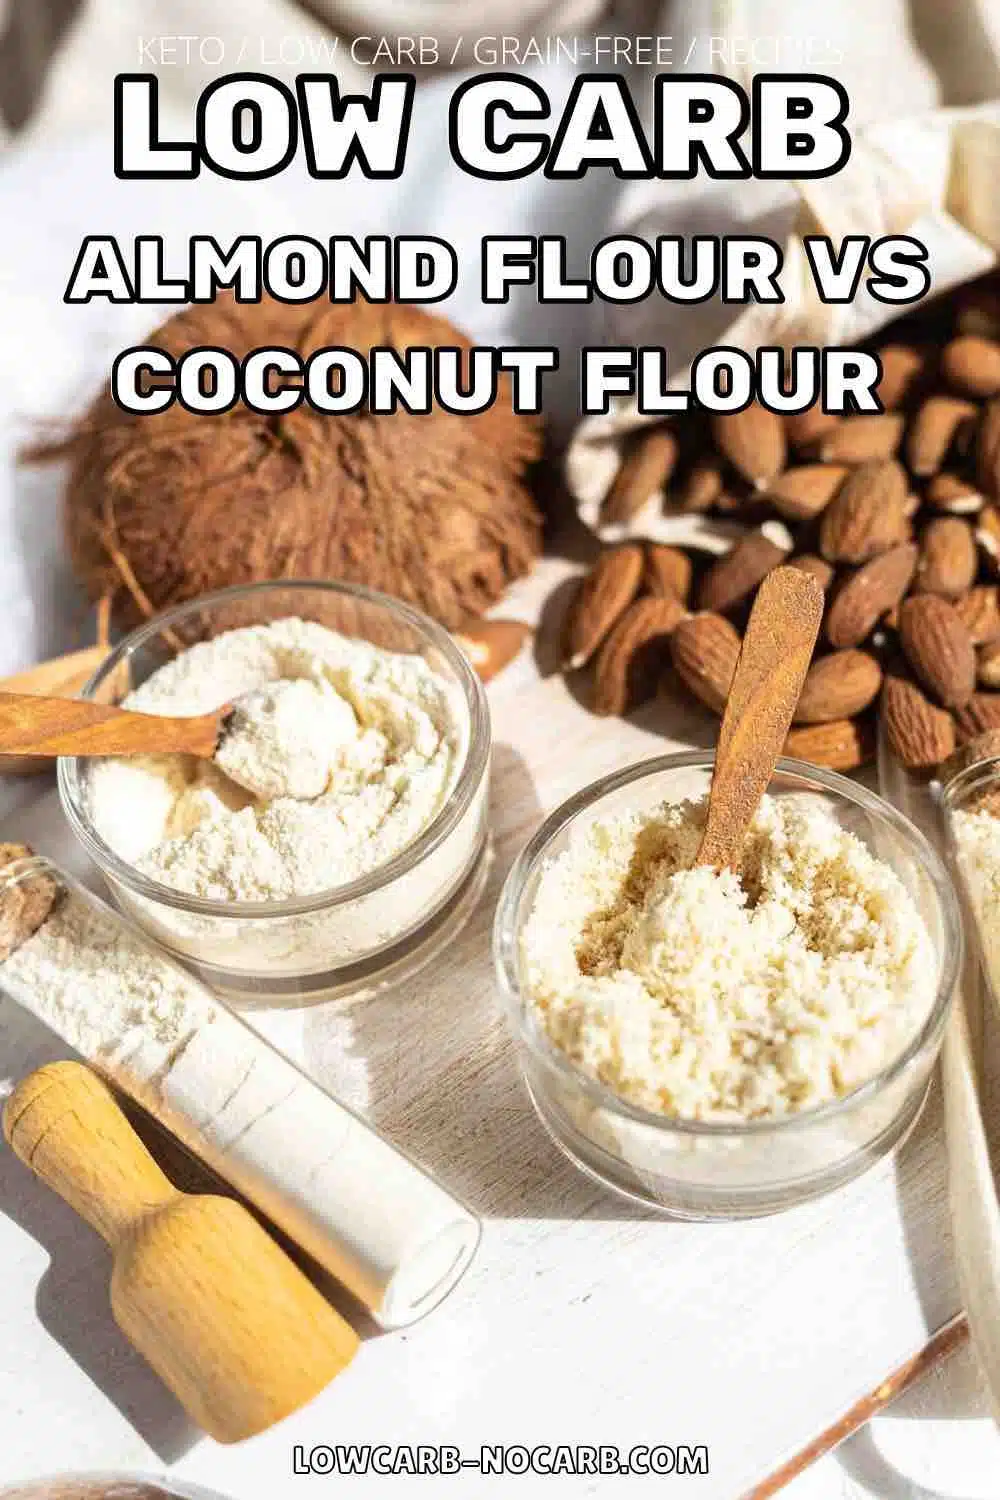 Differences between almond flour and coconut flour image of both.